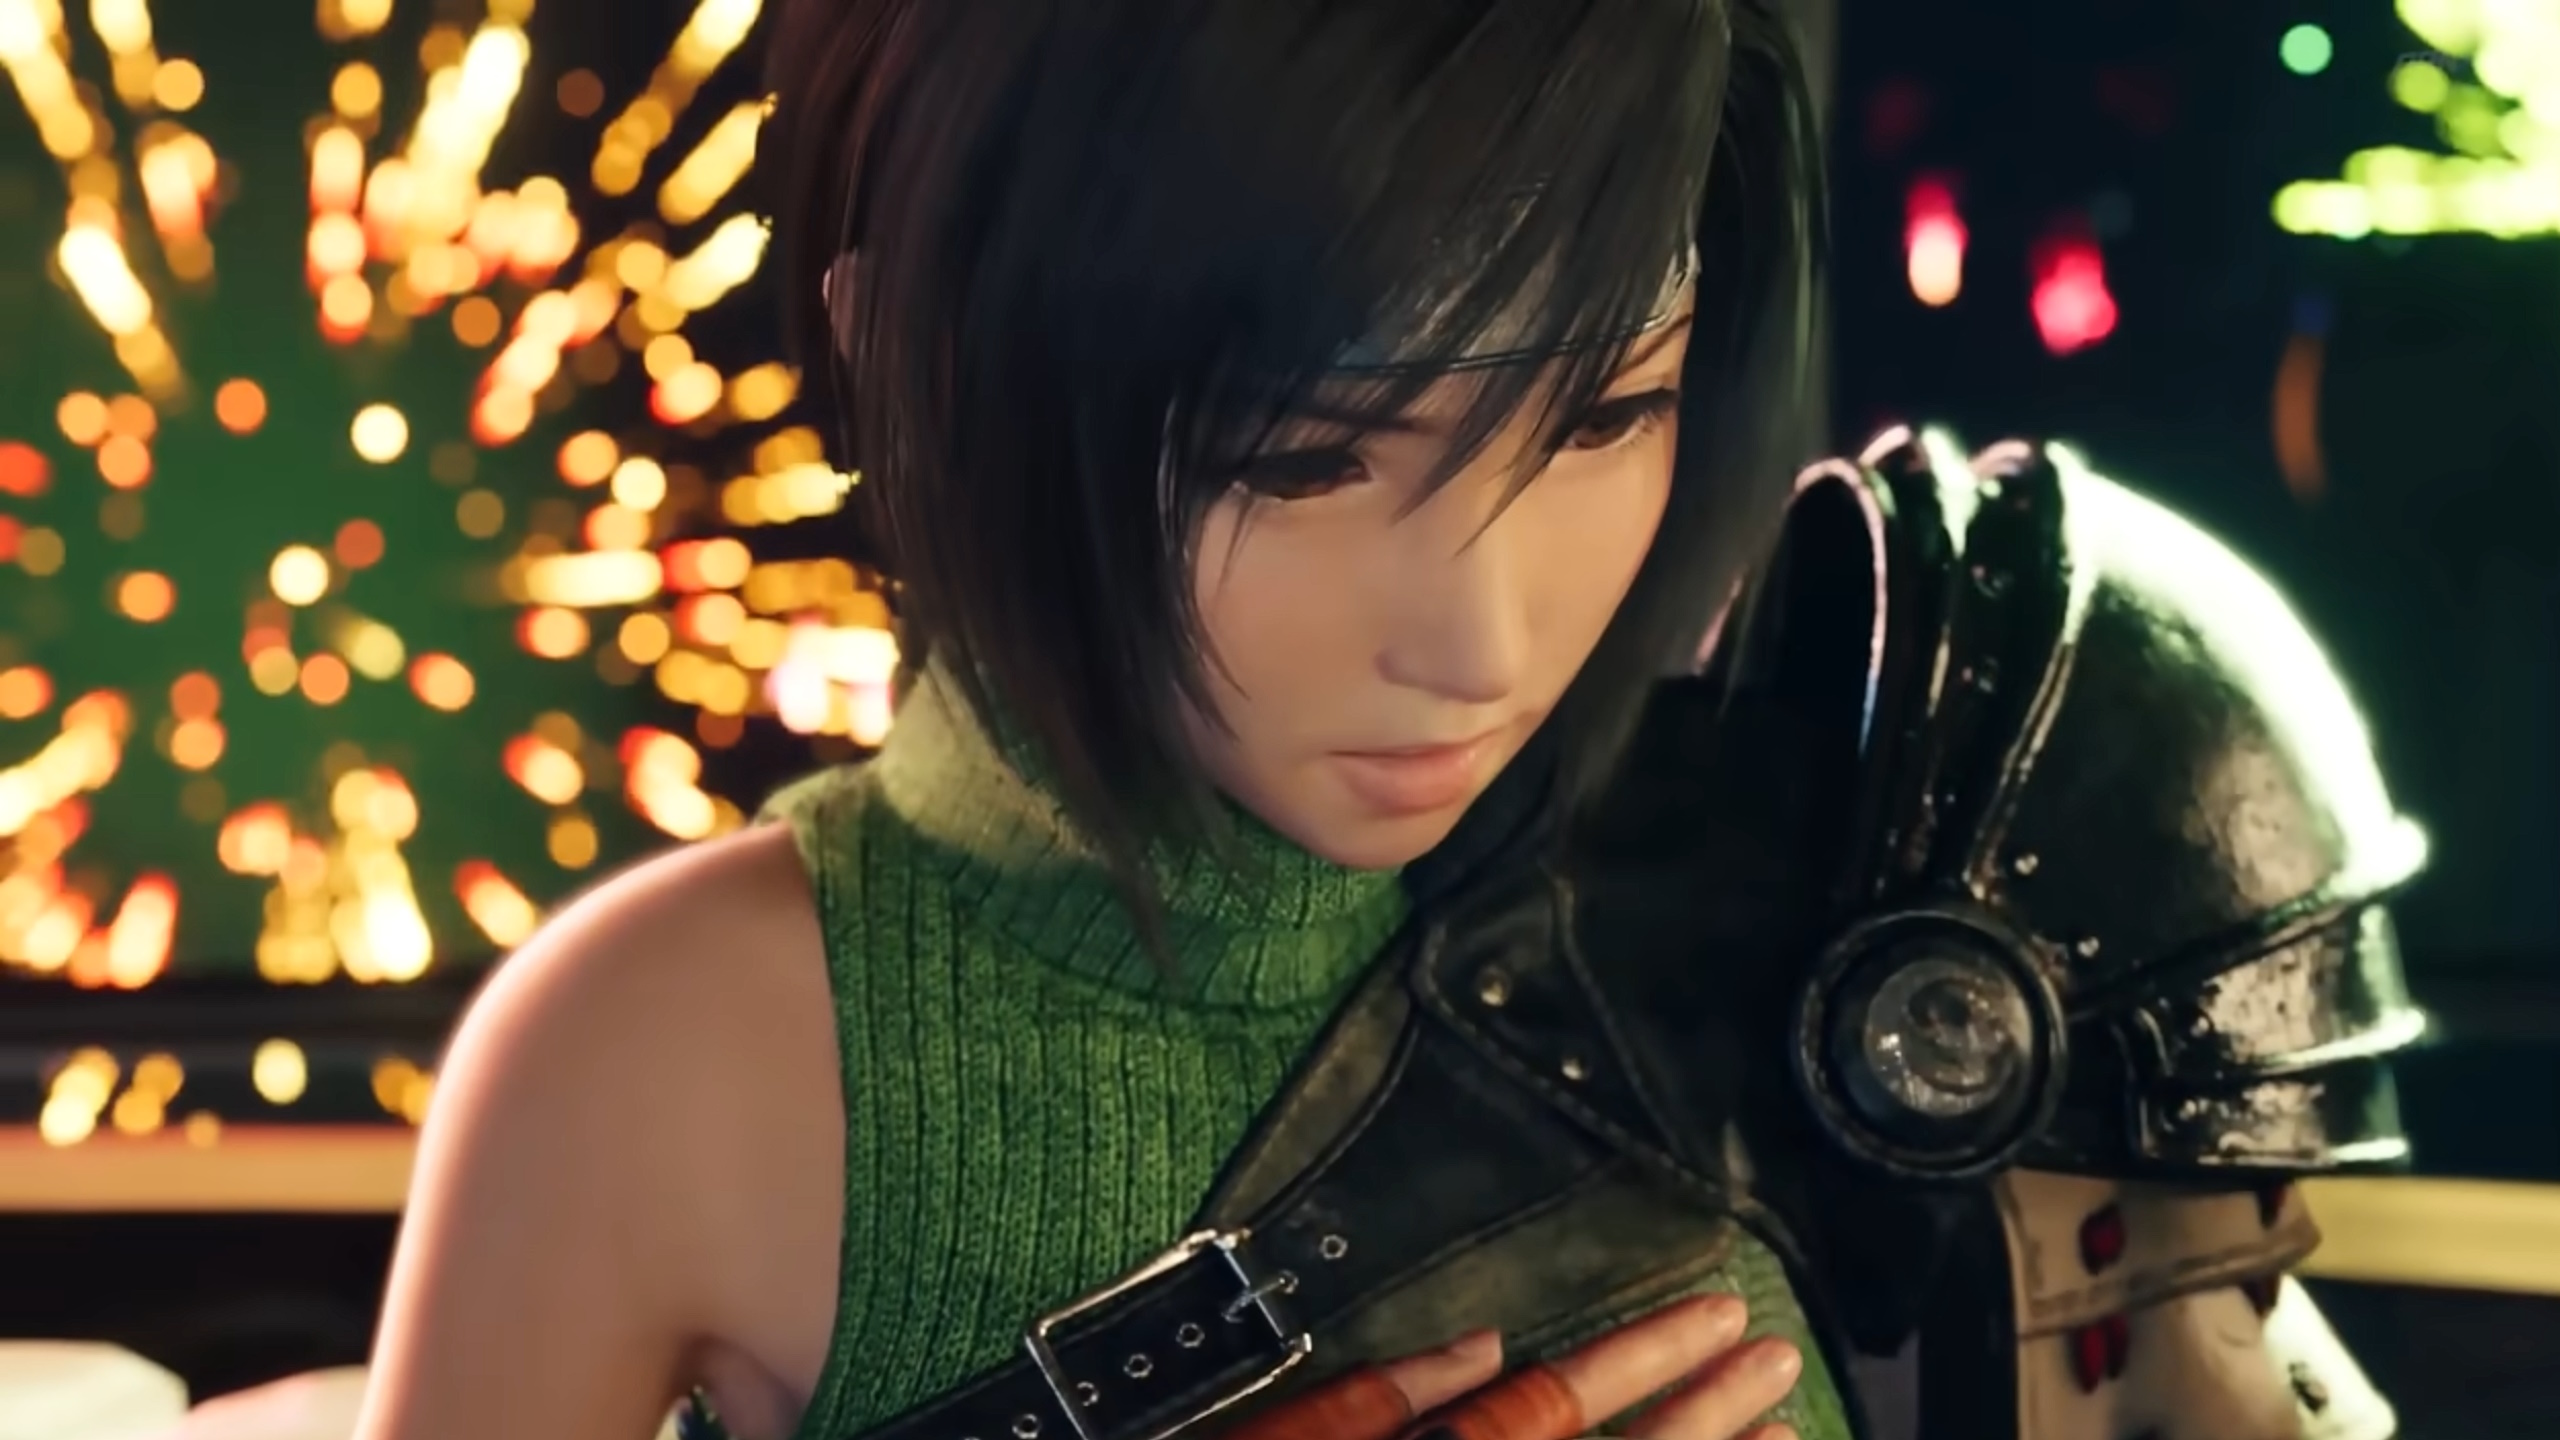 FF7 Rebirth's Yuffie, holding her left hand to her chest. Behind her, fireworks explode over the Gold Saucer